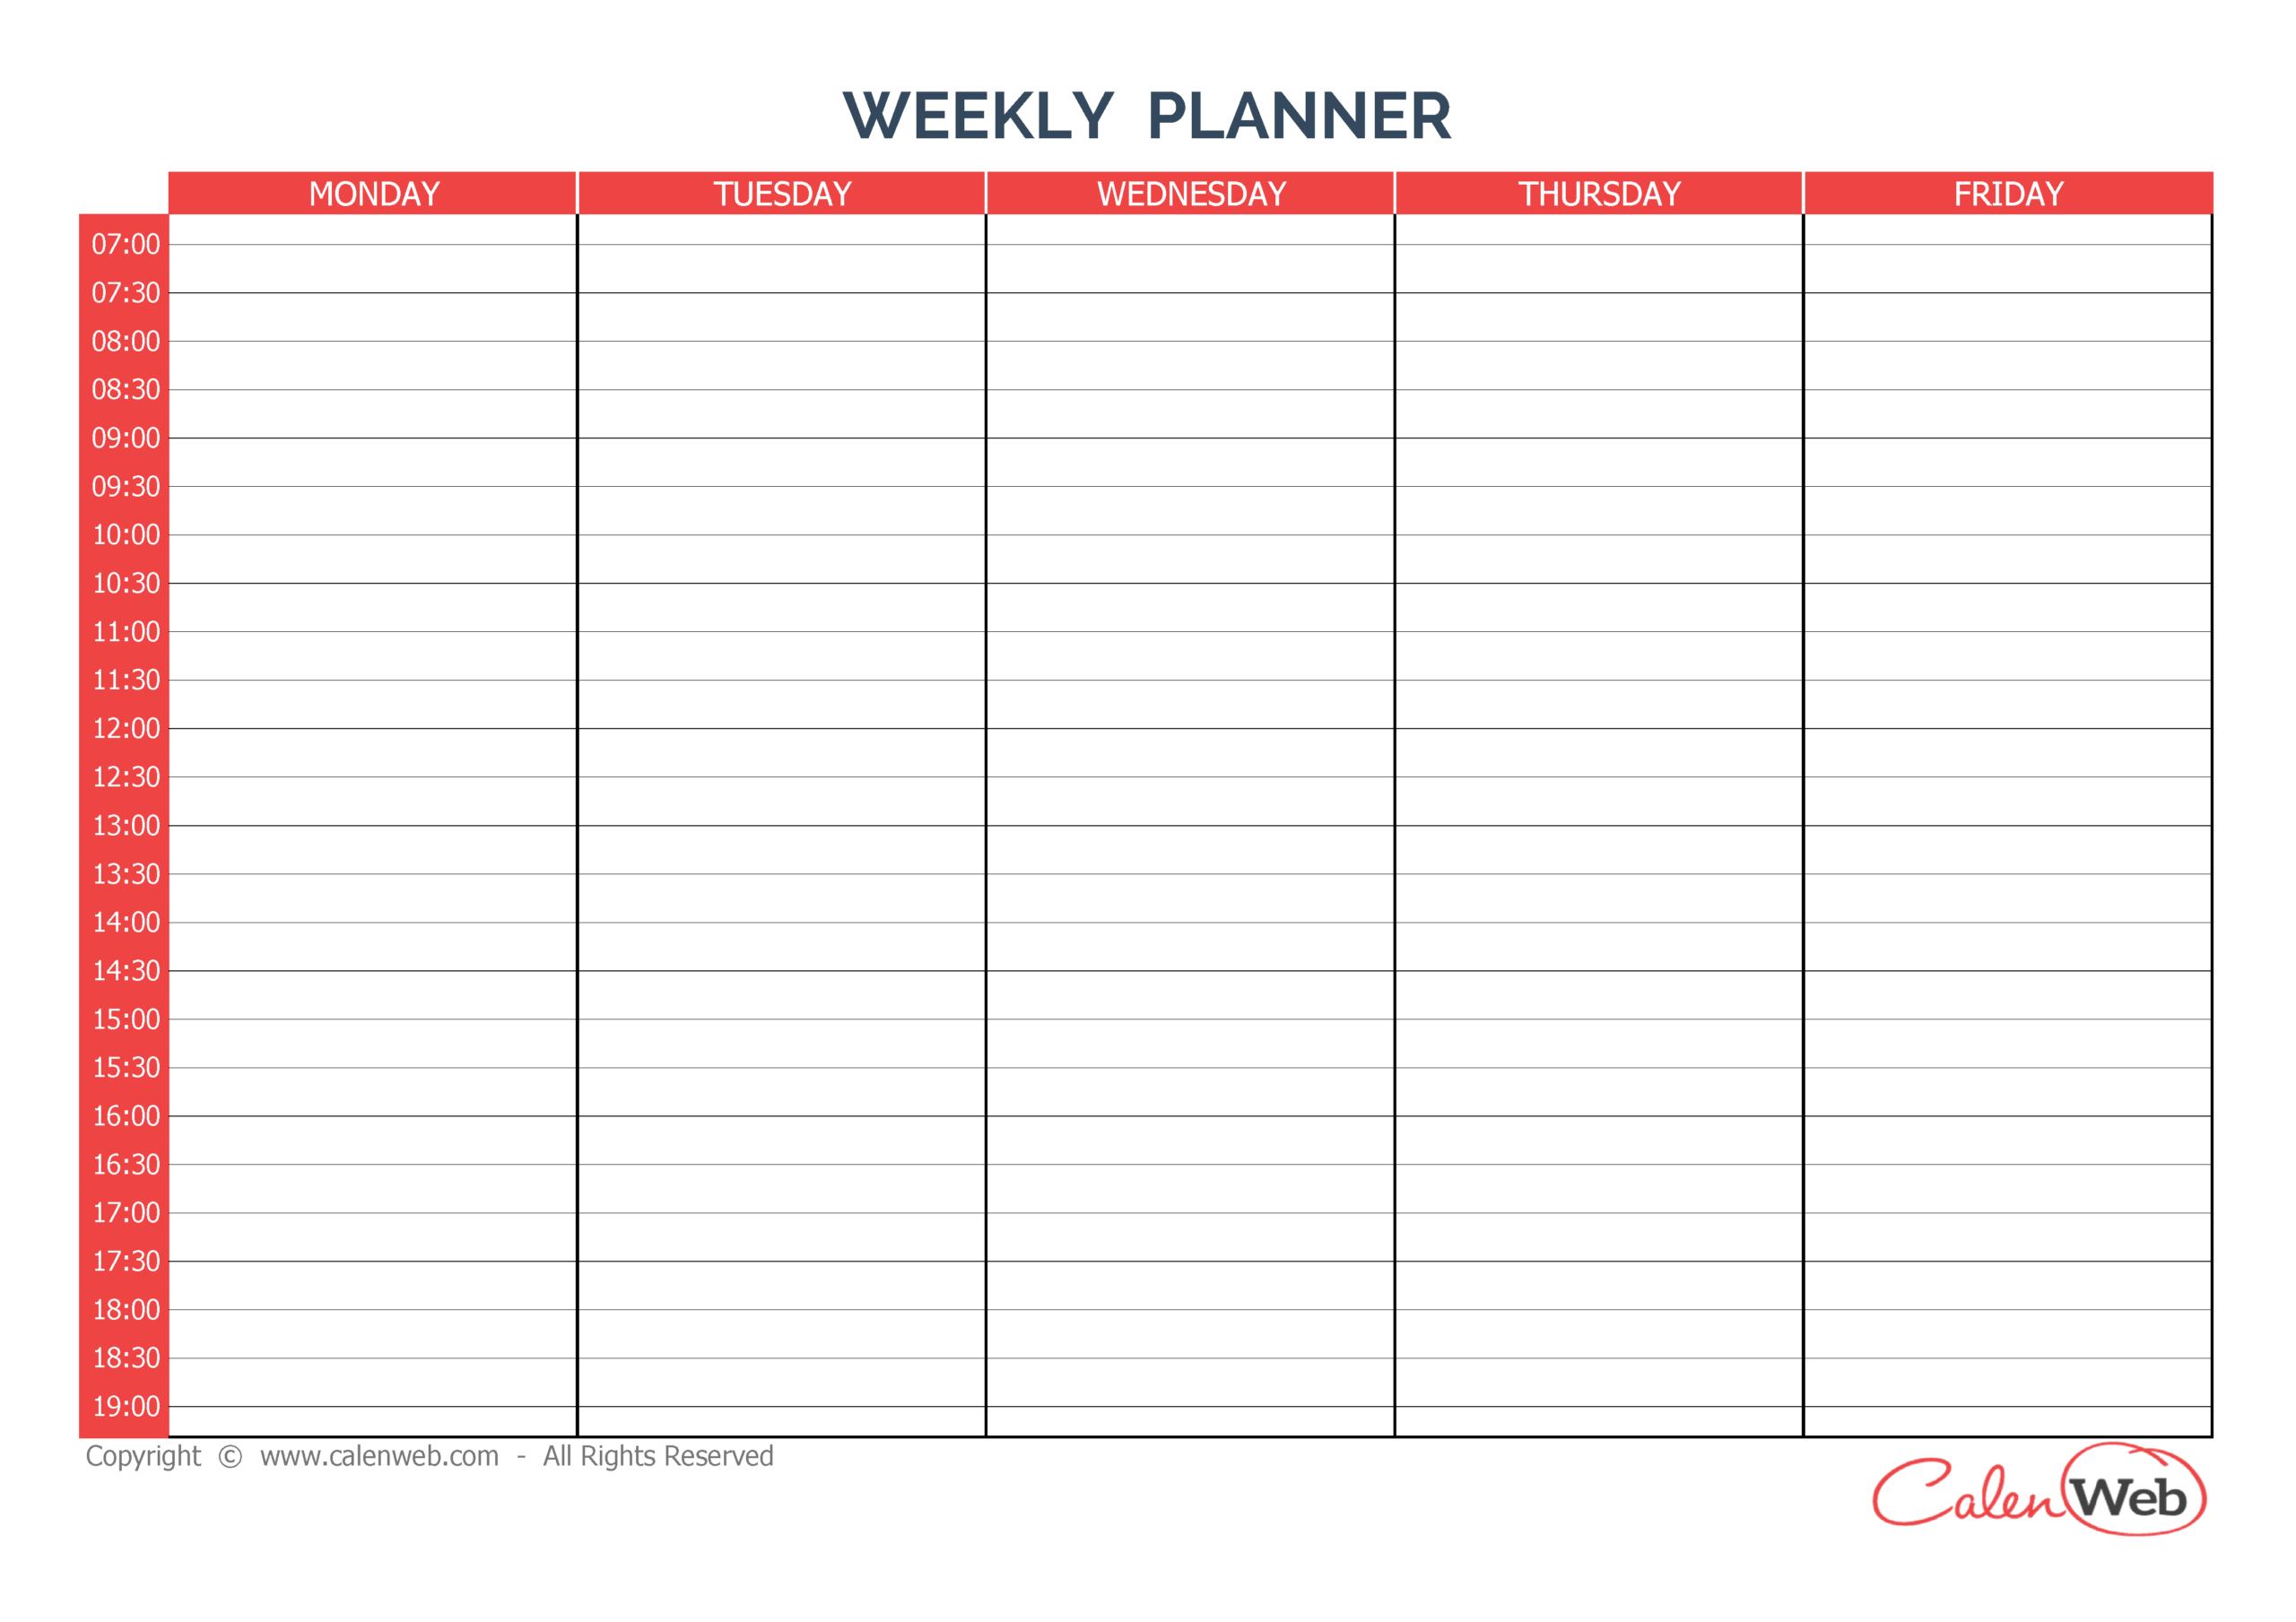 Weekly Planner 5 Days A Week Of 5 Days - Calenweb-Free Monthly 5 Day Schedules For 2021